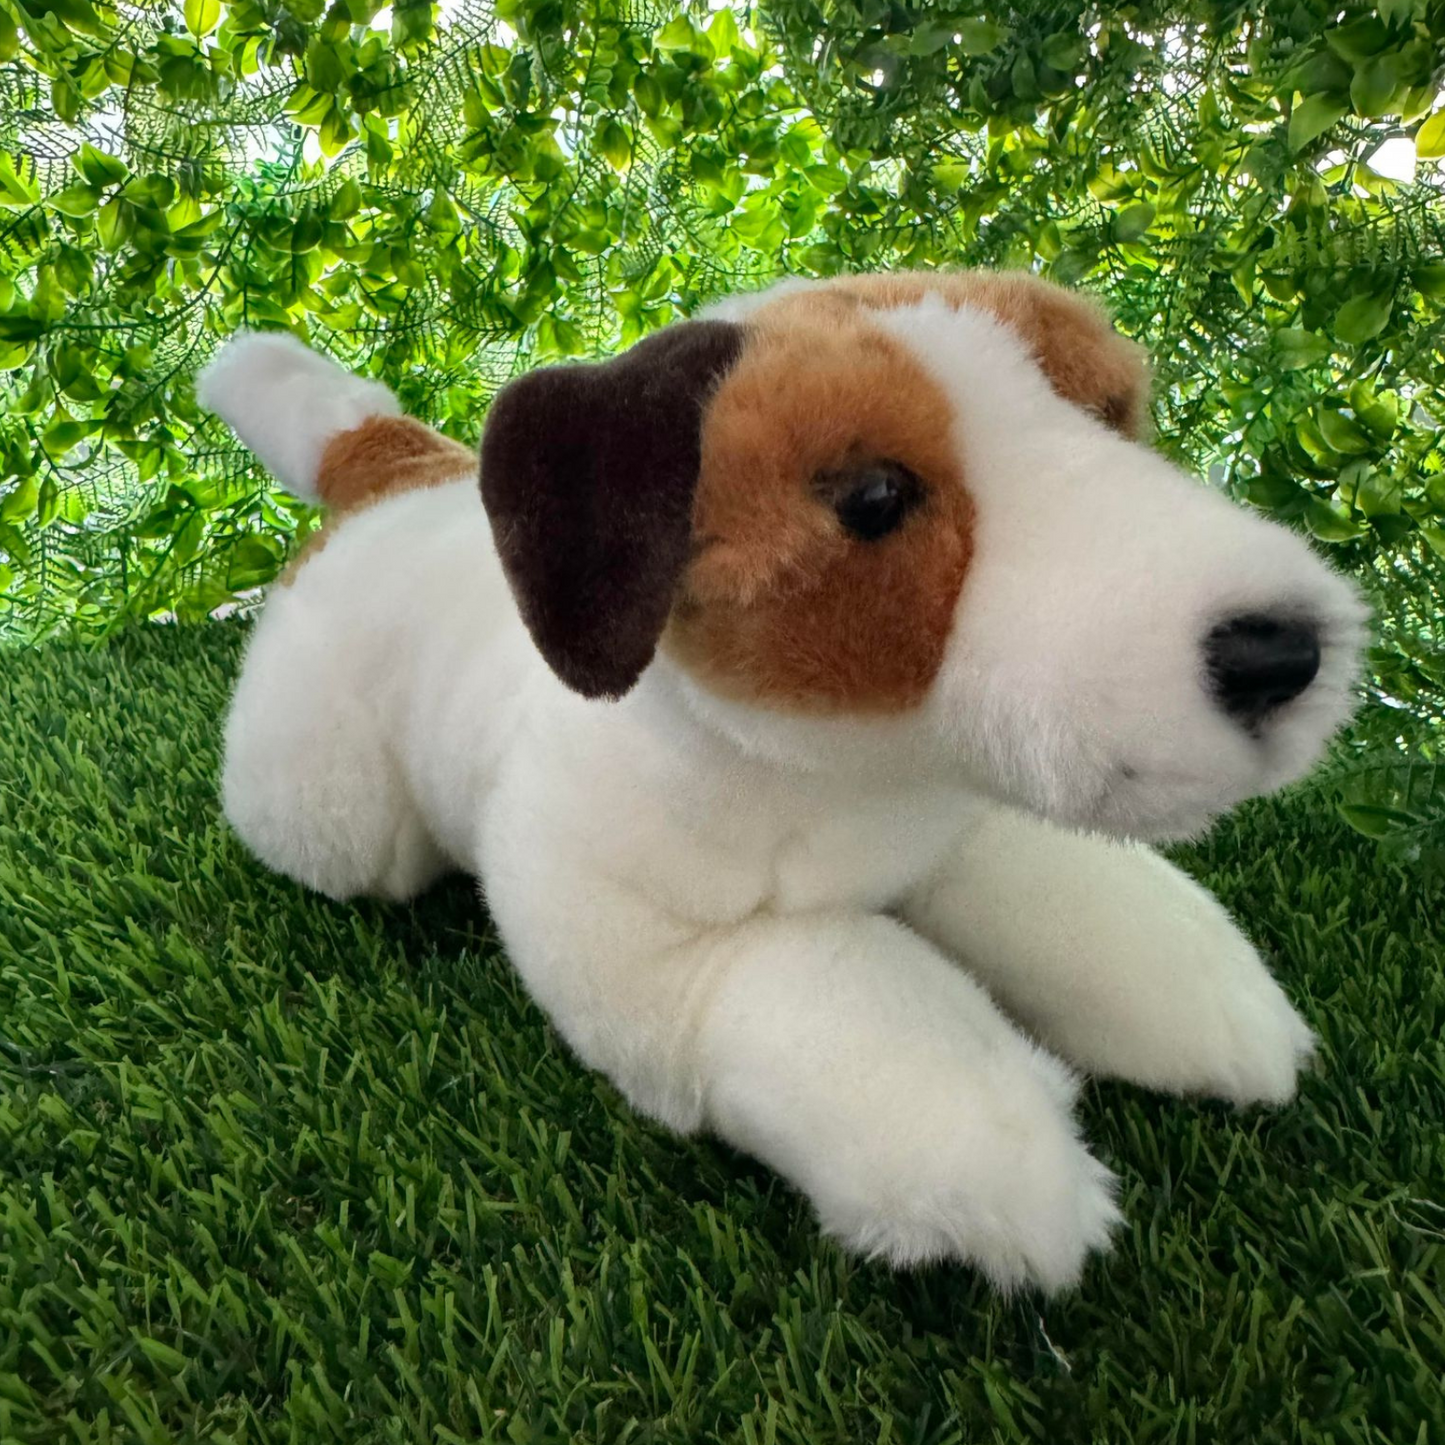 Jack Russell Terrier Plush